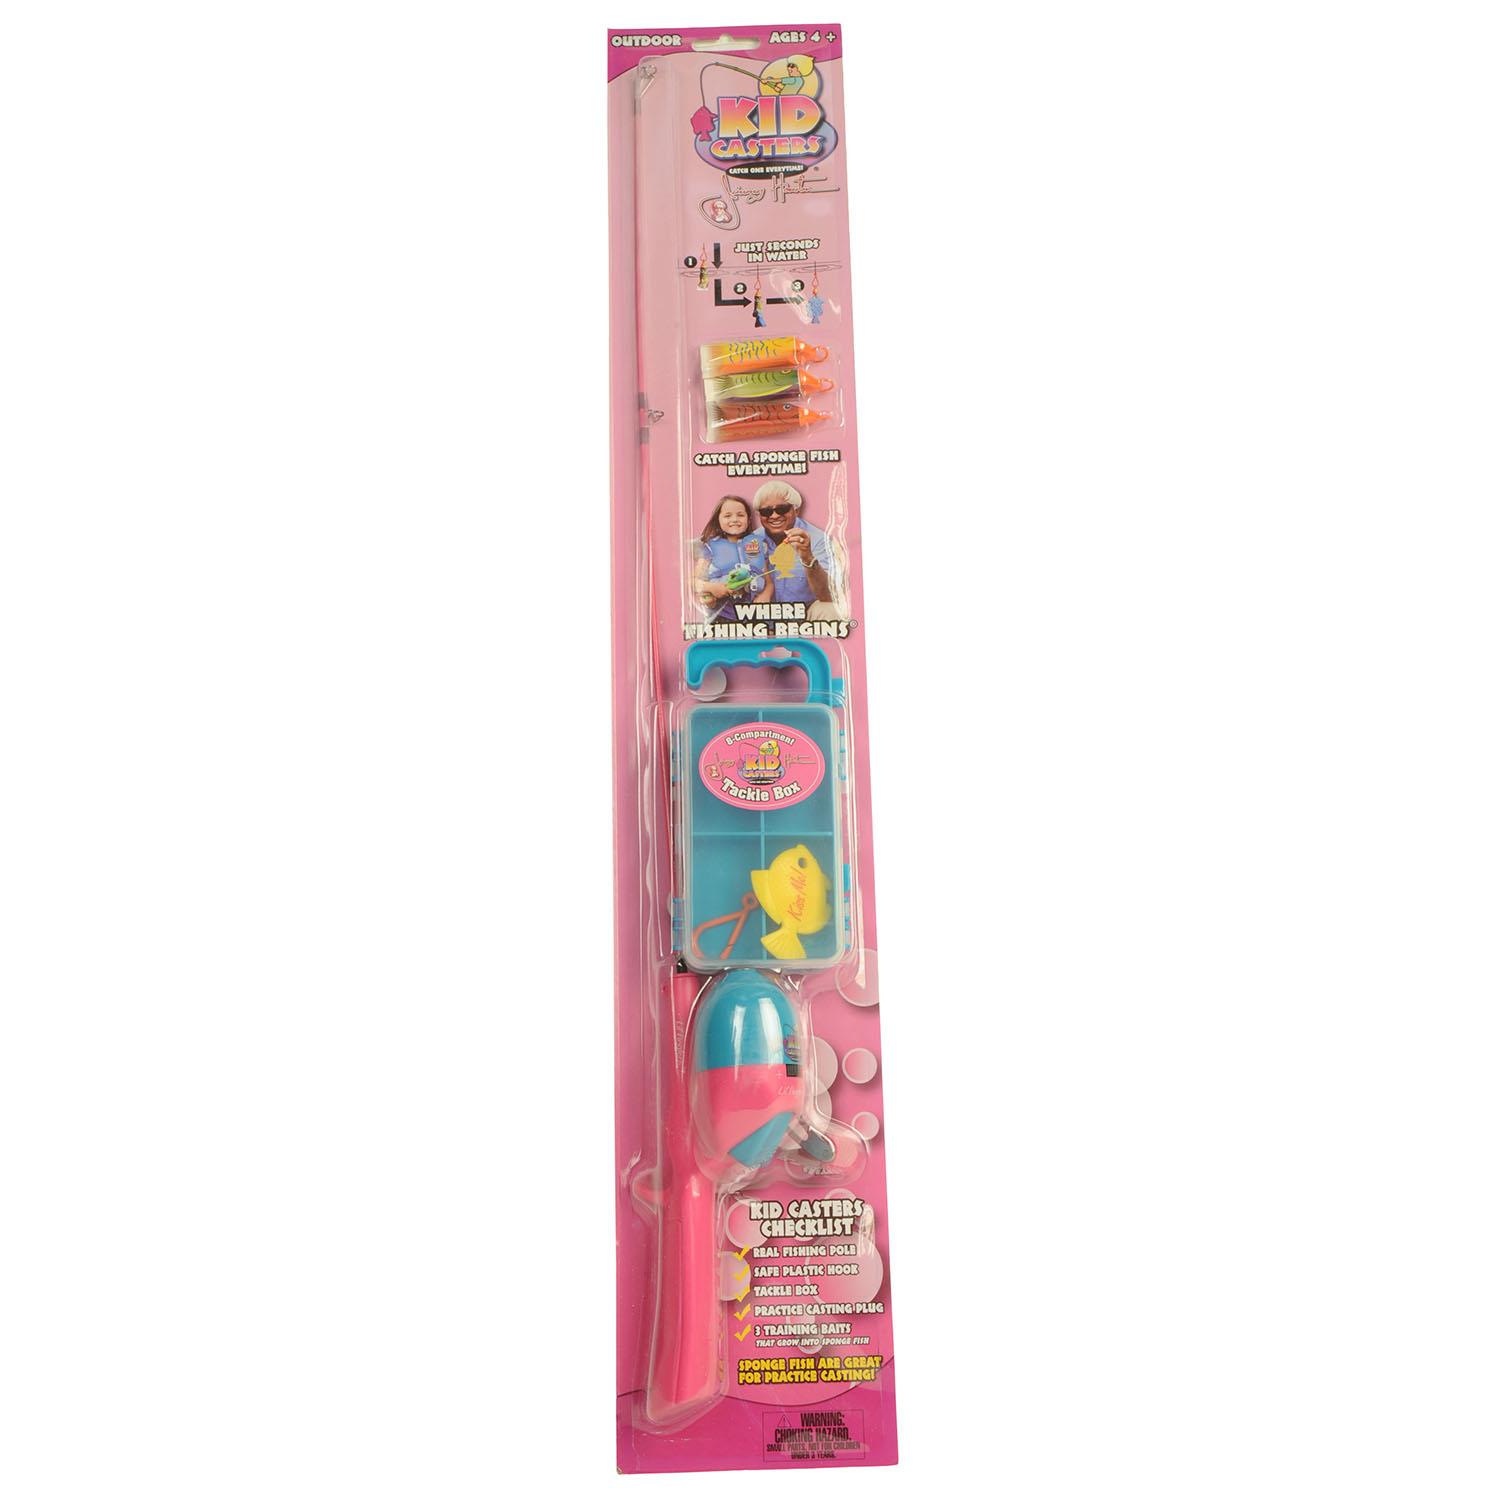 Lil Anglers KCDTG2352 Kid Casters Jimmy Houston Girl's Fishing Combo